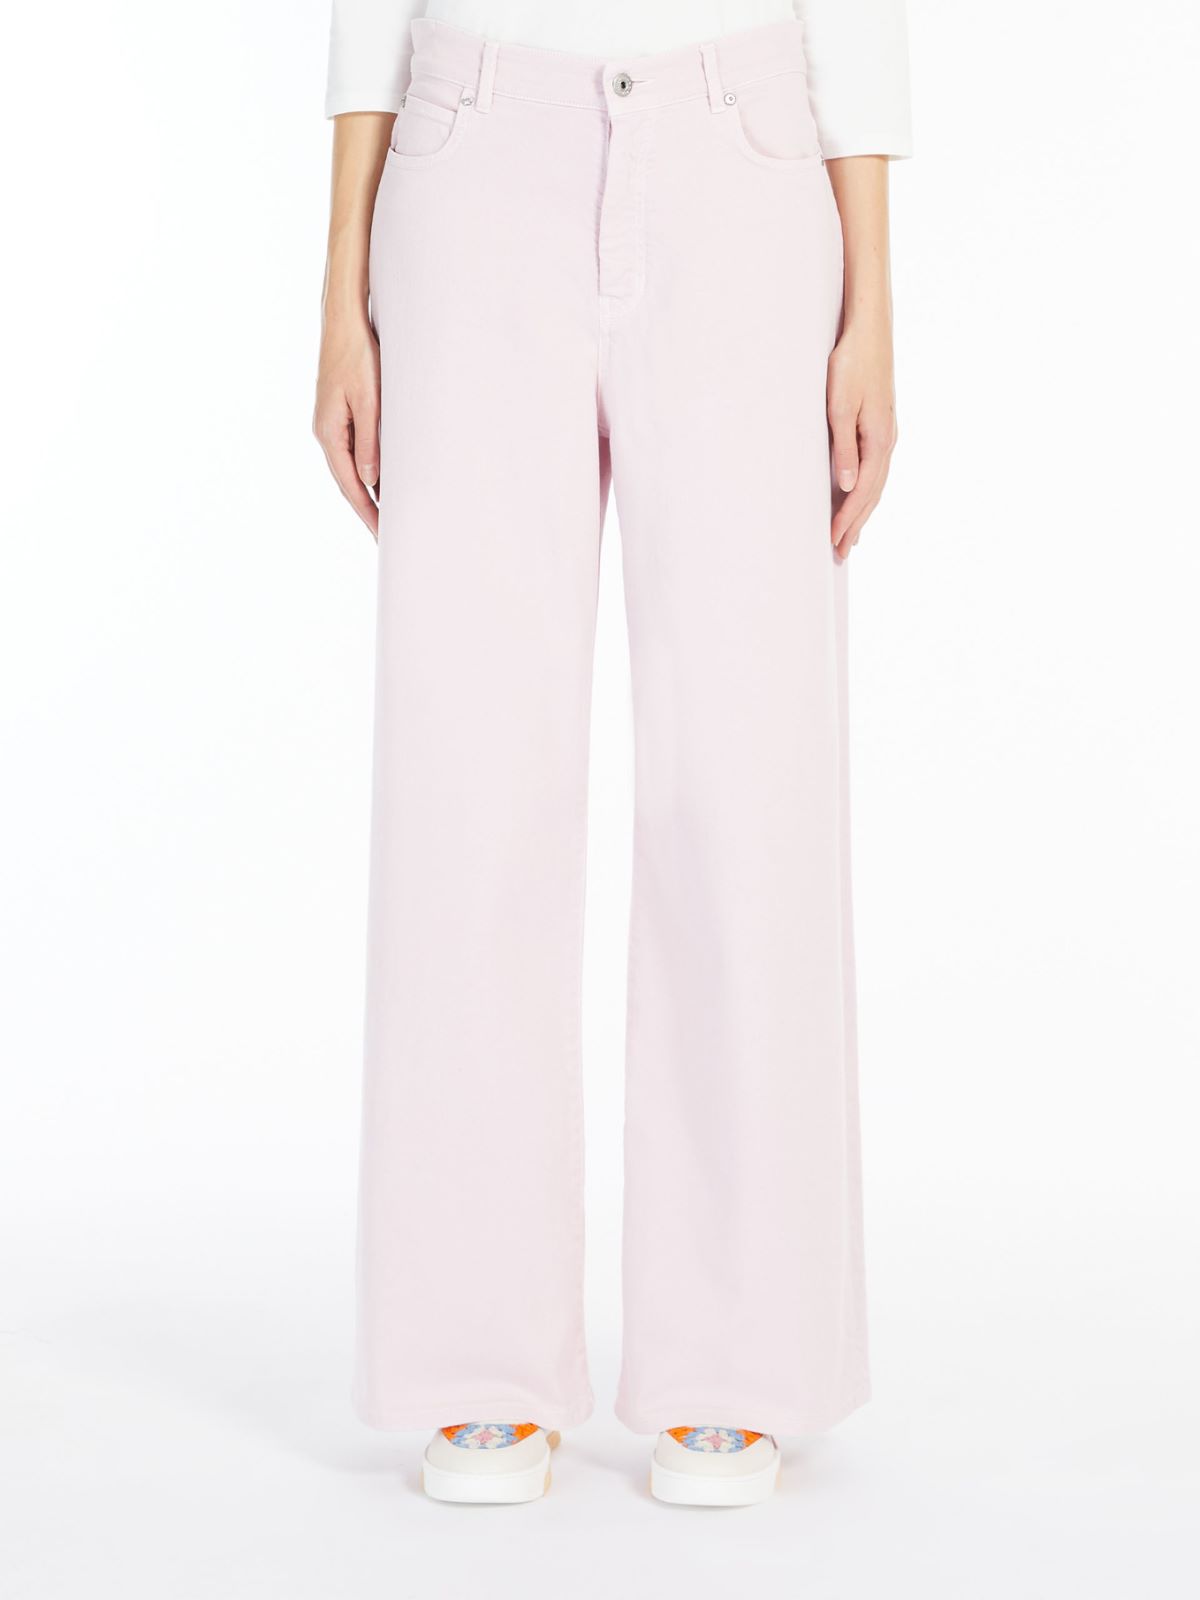 Stretch cotton trousers - PEONY - Weekend Max Mara - 2